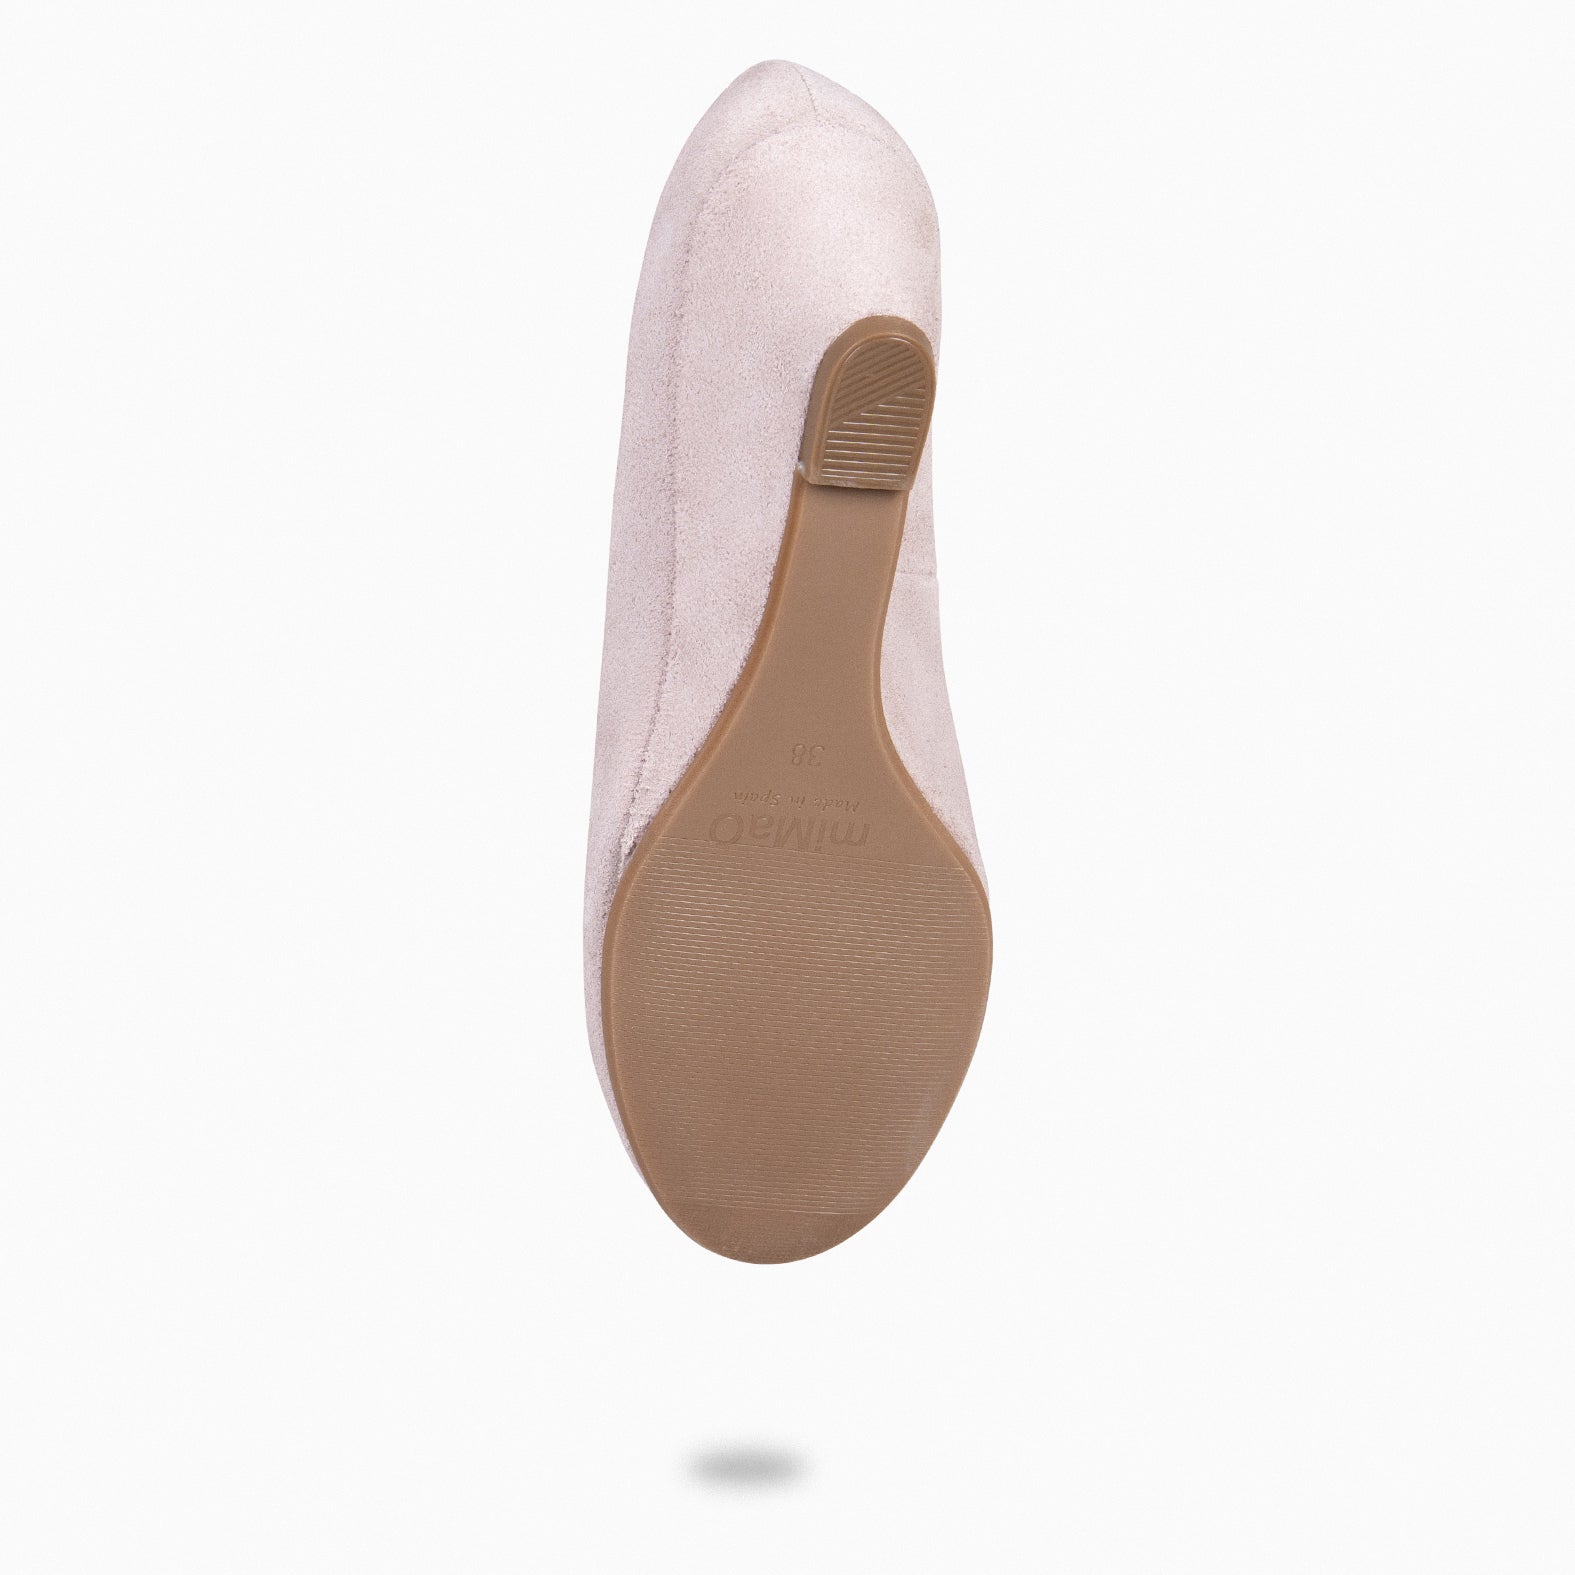 WEDGE ROUND – NUDE Shoes with wedge 